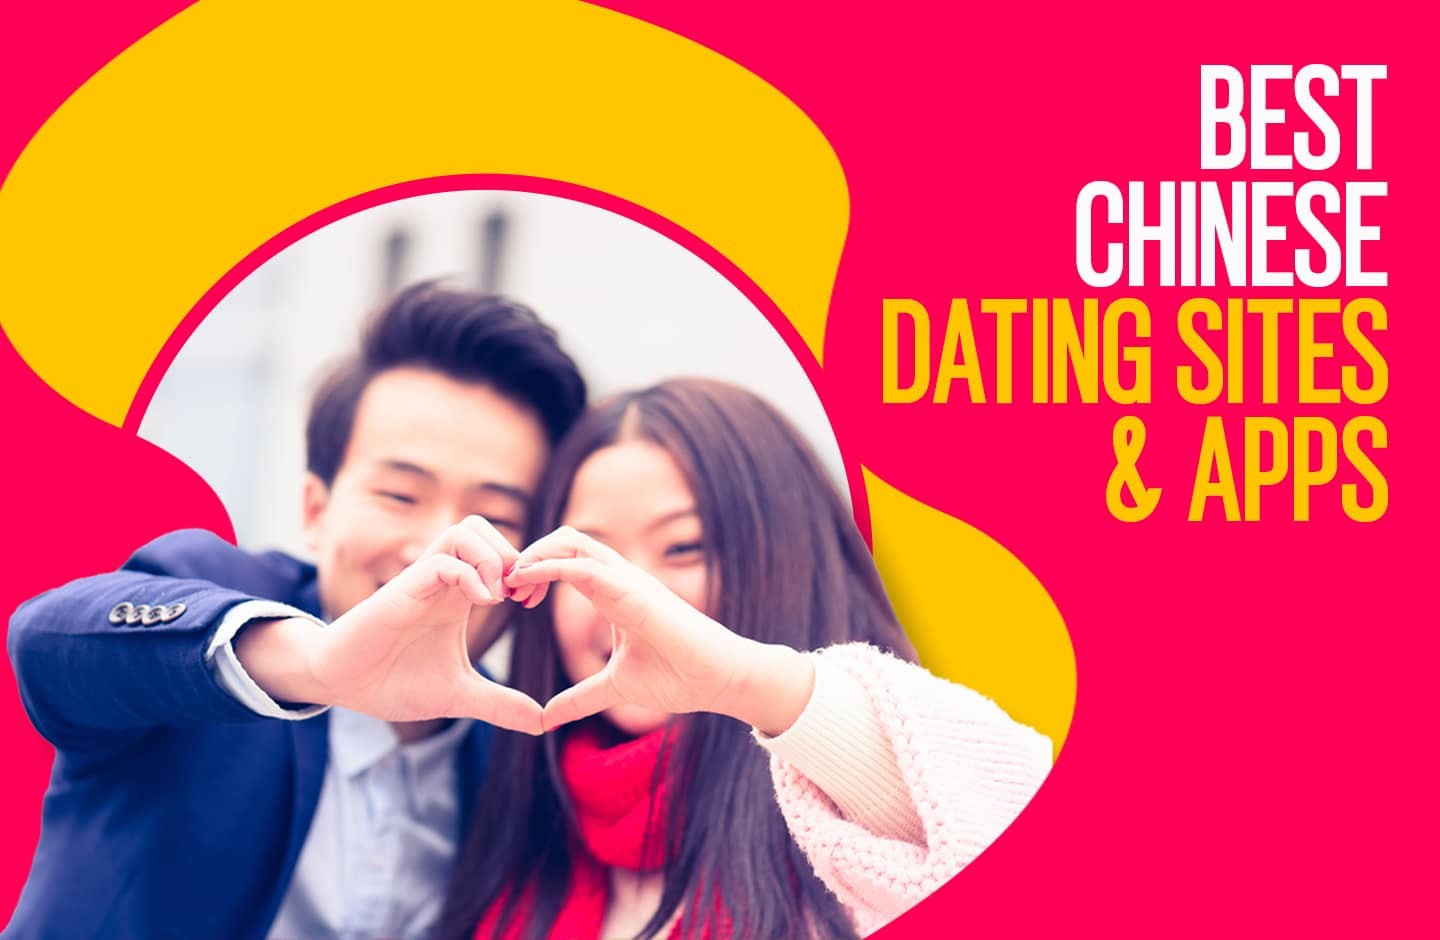 Local free dating sites in Guangzhou